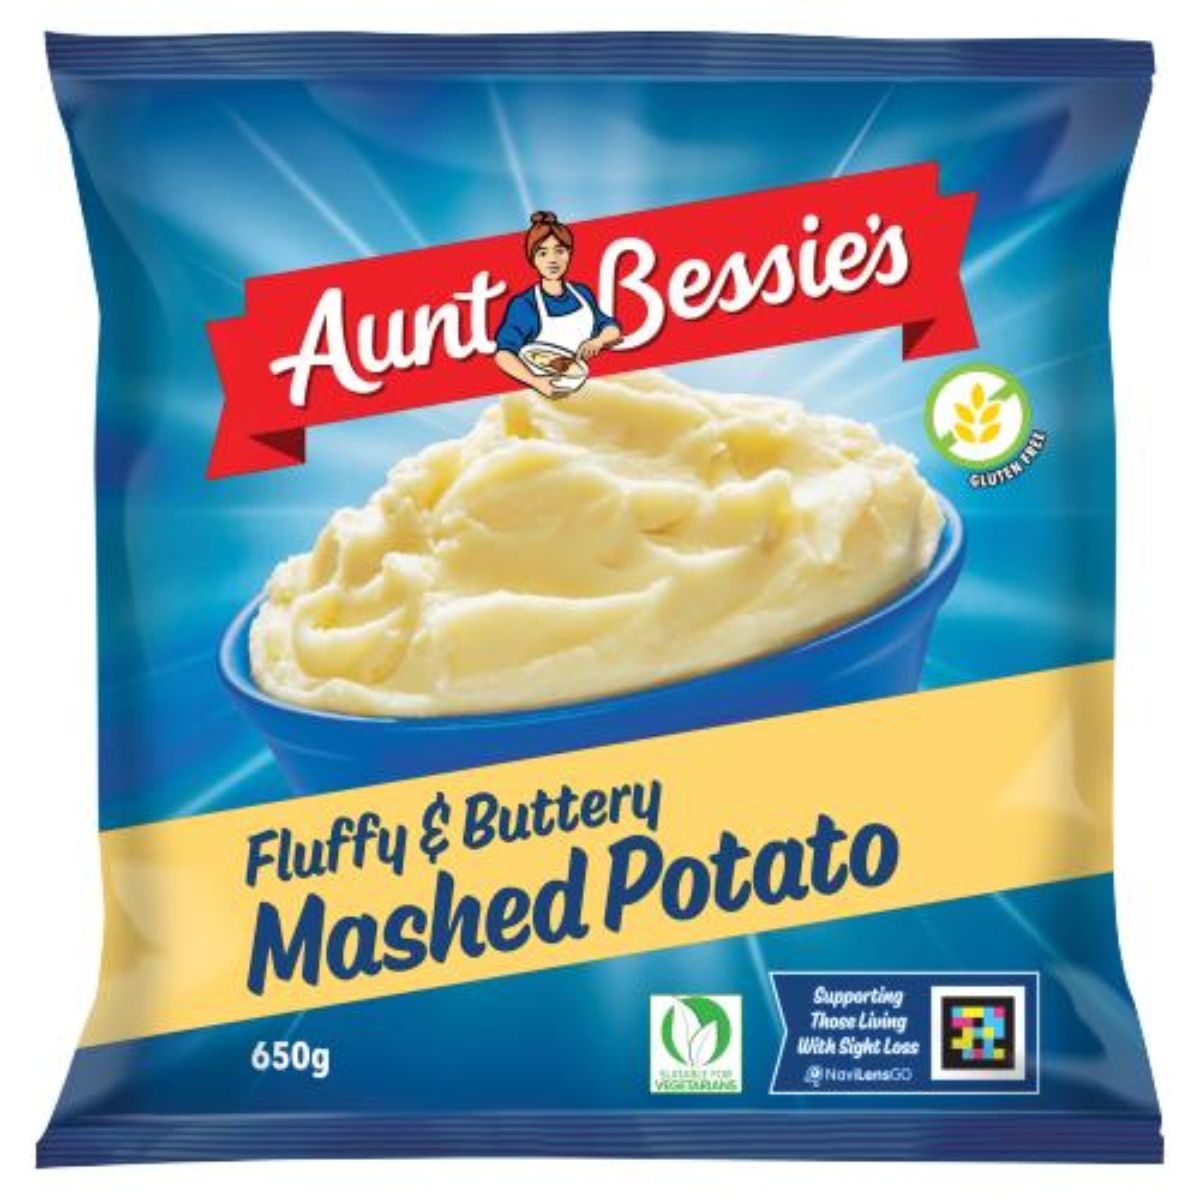 Aunt Bessies - Fluffy & Buttery Mashed Potato - 650g is a delicious product.